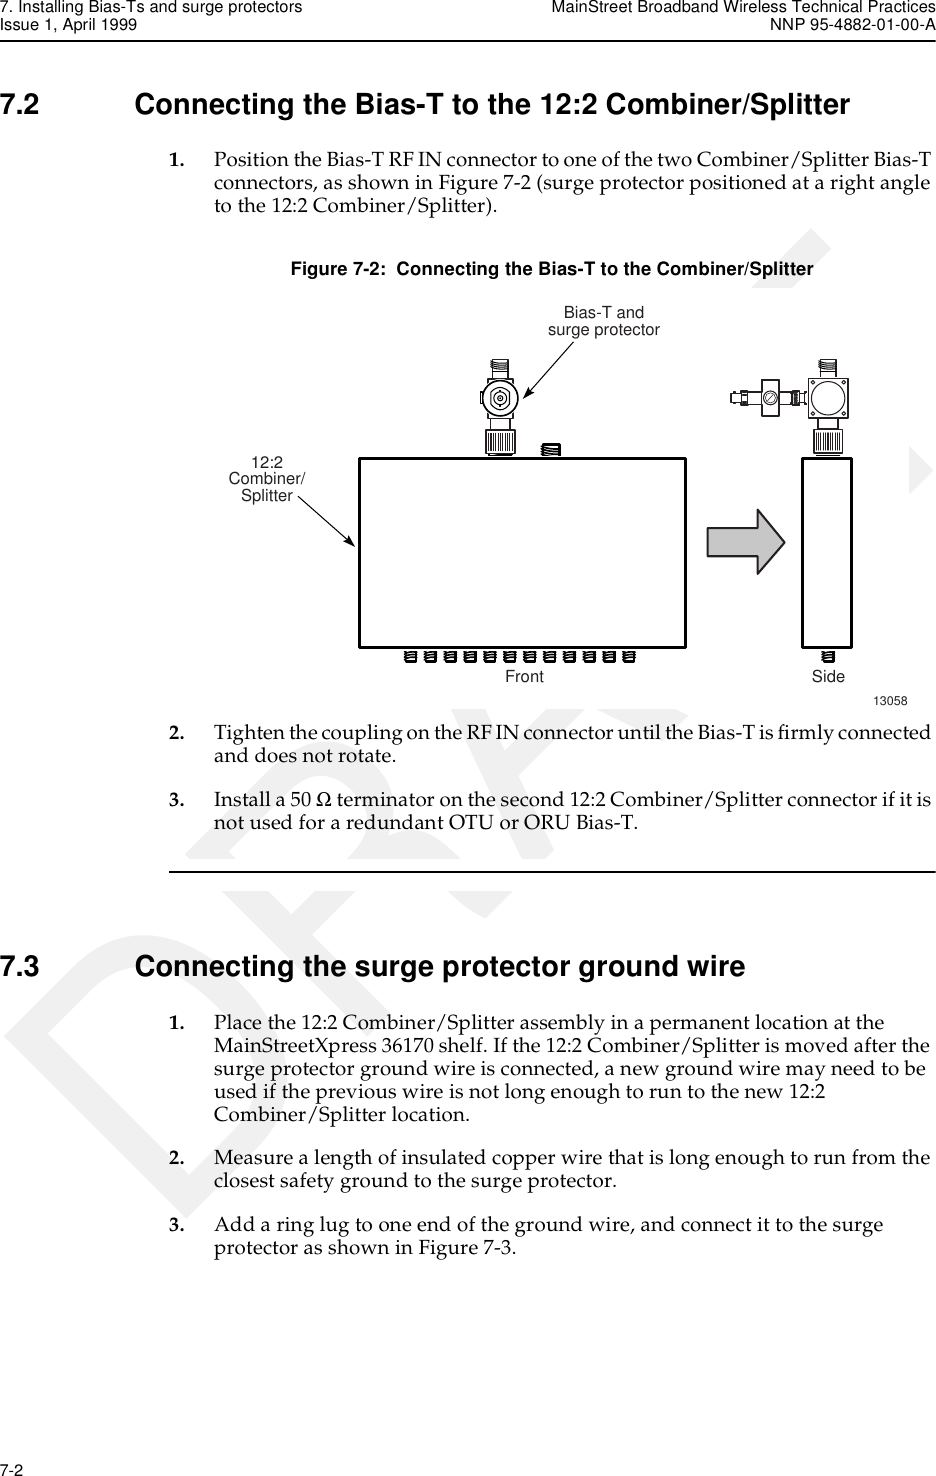 7. Installing Bias-Ts and surge protectors MainStreet Broadband Wireless Technical PracticesIssue 1, April 1999 NNP 95-4882-01-00-A7-2   DRAFT7.2 Connecting the Bias-T to the 12:2 Combiner/Splitter1. Position the Bias-T RF IN connector to one of the two Combiner/Splitter Bias-T connectors, as shown in Figure 7-2 (surge protector positioned at a right angle to the 12:2 Combiner/Splitter).Figure 7-2:  Connecting the Bias-T to the Combiner/Splitter2. Tighten the coupling on the RF IN connector until the Bias-T is firmly connected and does not rotate. 3. Install a 50 Ω terminator on the second 12:2 Combiner/Splitter connector if it is not used for a redundant OTU or ORU Bias-T. 7.3 Connecting the surge protector ground wire1. Place the 12:2 Combiner/Splitter assembly in a permanent location at the MainStreetXpress 36170 shelf. If the 12:2 Combiner/Splitter is moved after the surge protector ground wire is connected, a new ground wire may need to be used if the previous wire is not long enough to run to the new 12:2 Combiner/Splitter location.2. Measure a length of insulated copper wire that is long enough to run from the closest safety ground to the surge protector.3. Add a ring lug to one end of the ground wire, and connect it to the surge protector as shown in Figure 7-3.13058Front SideBias-T andsurge protector12:2Combiner/Splitter